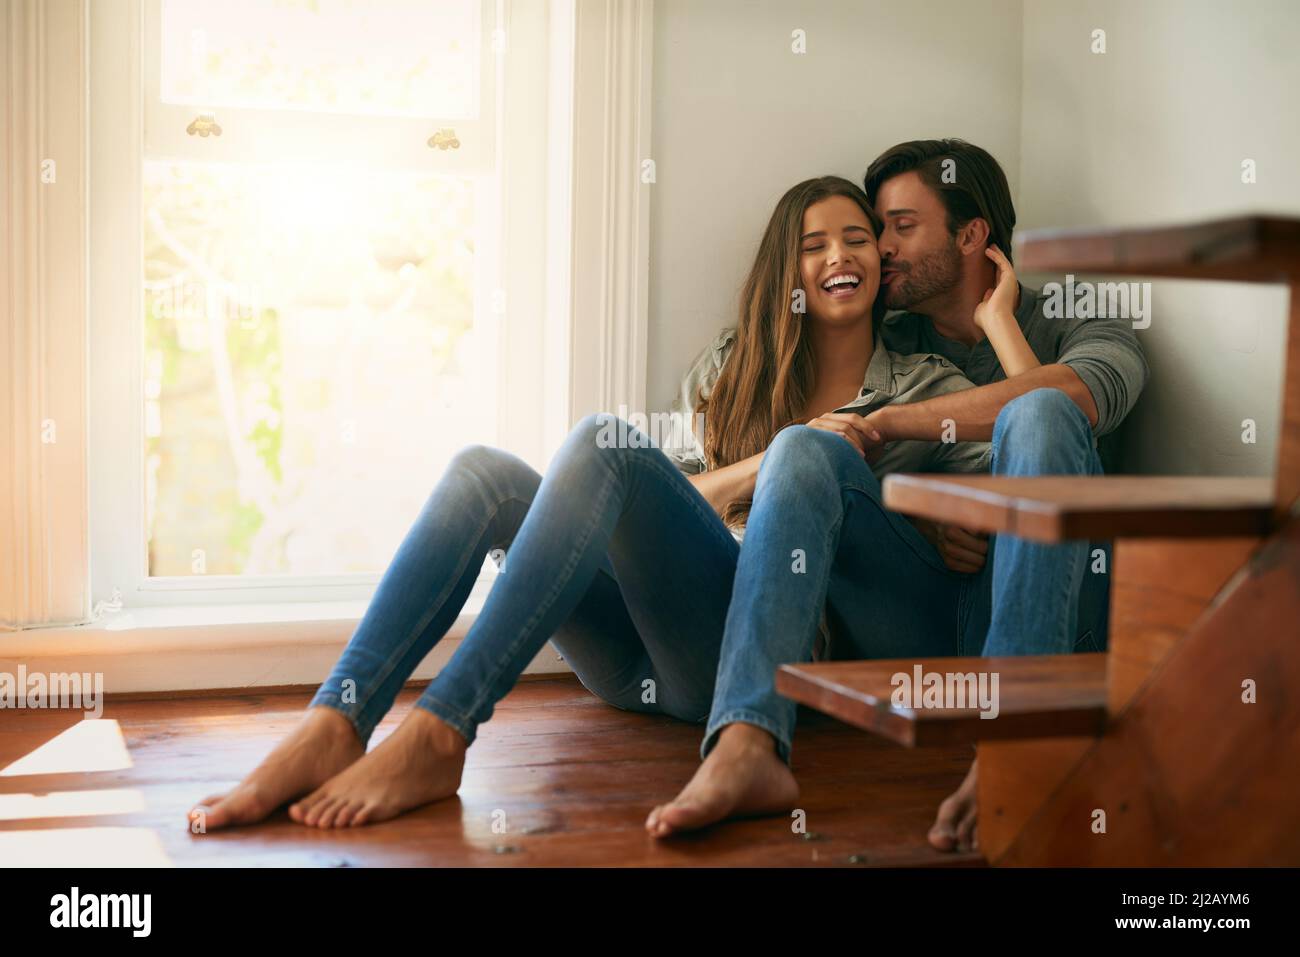 We are both the same in every way. Shot of an affectionate young couple sitting in a corner and holding each other. Stock Photo